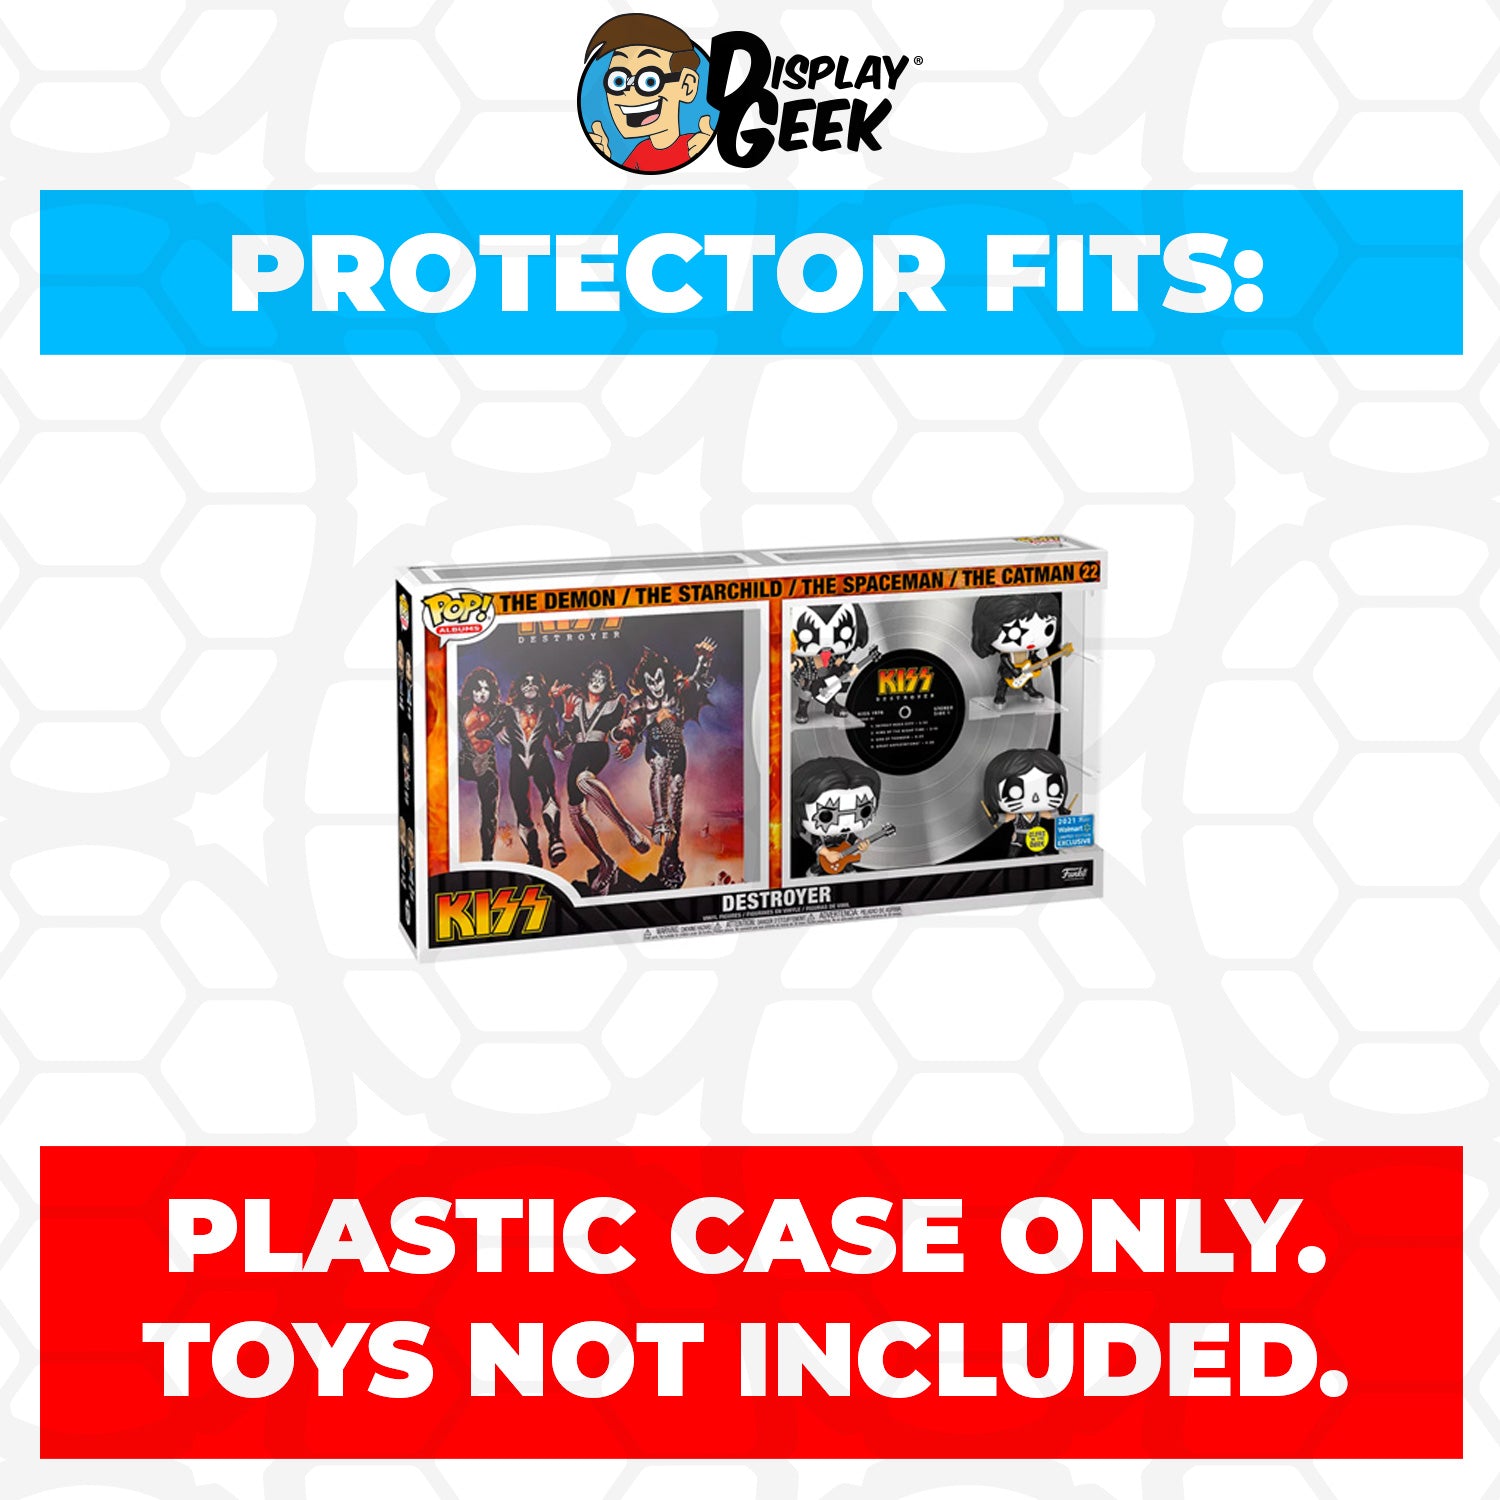 Pop Protector for KISS Destroyer GITD #22 Funko Pop Albums Deluxe - PPG Pop Protector Guide Search Created by Display Geek